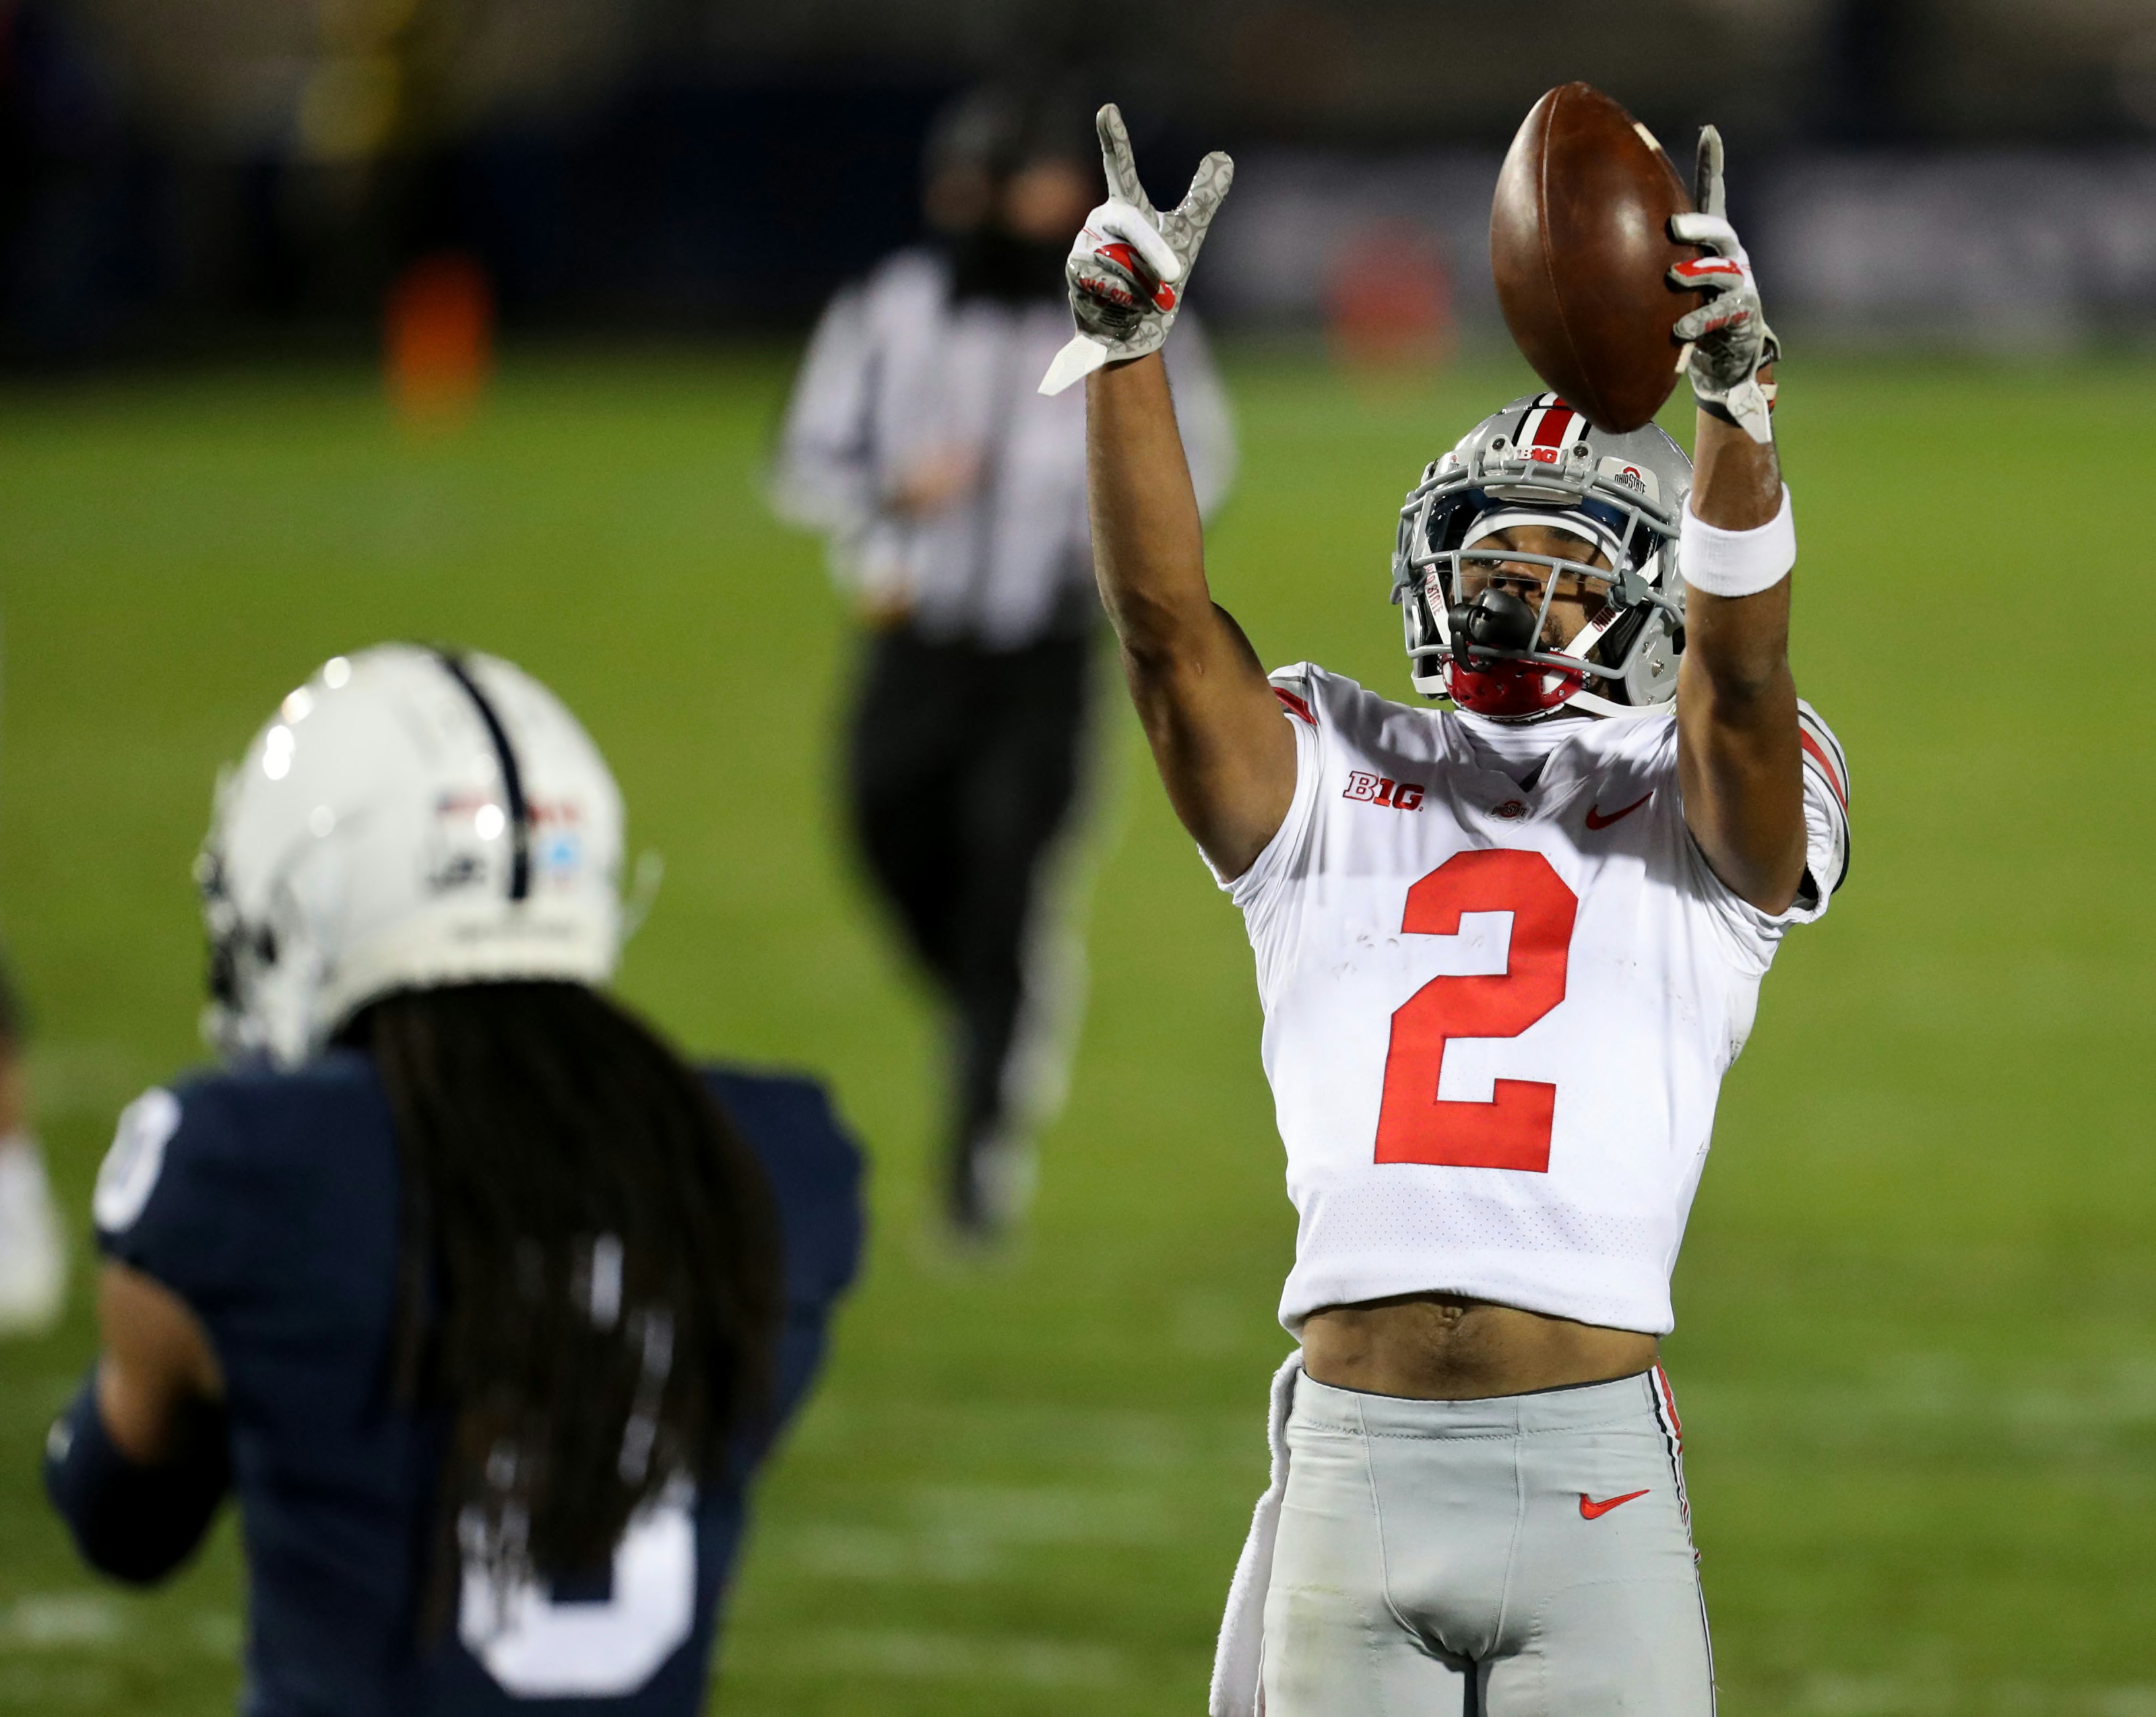 Ohio State Football Chris Olave expected to enter 2021 NFL Draft